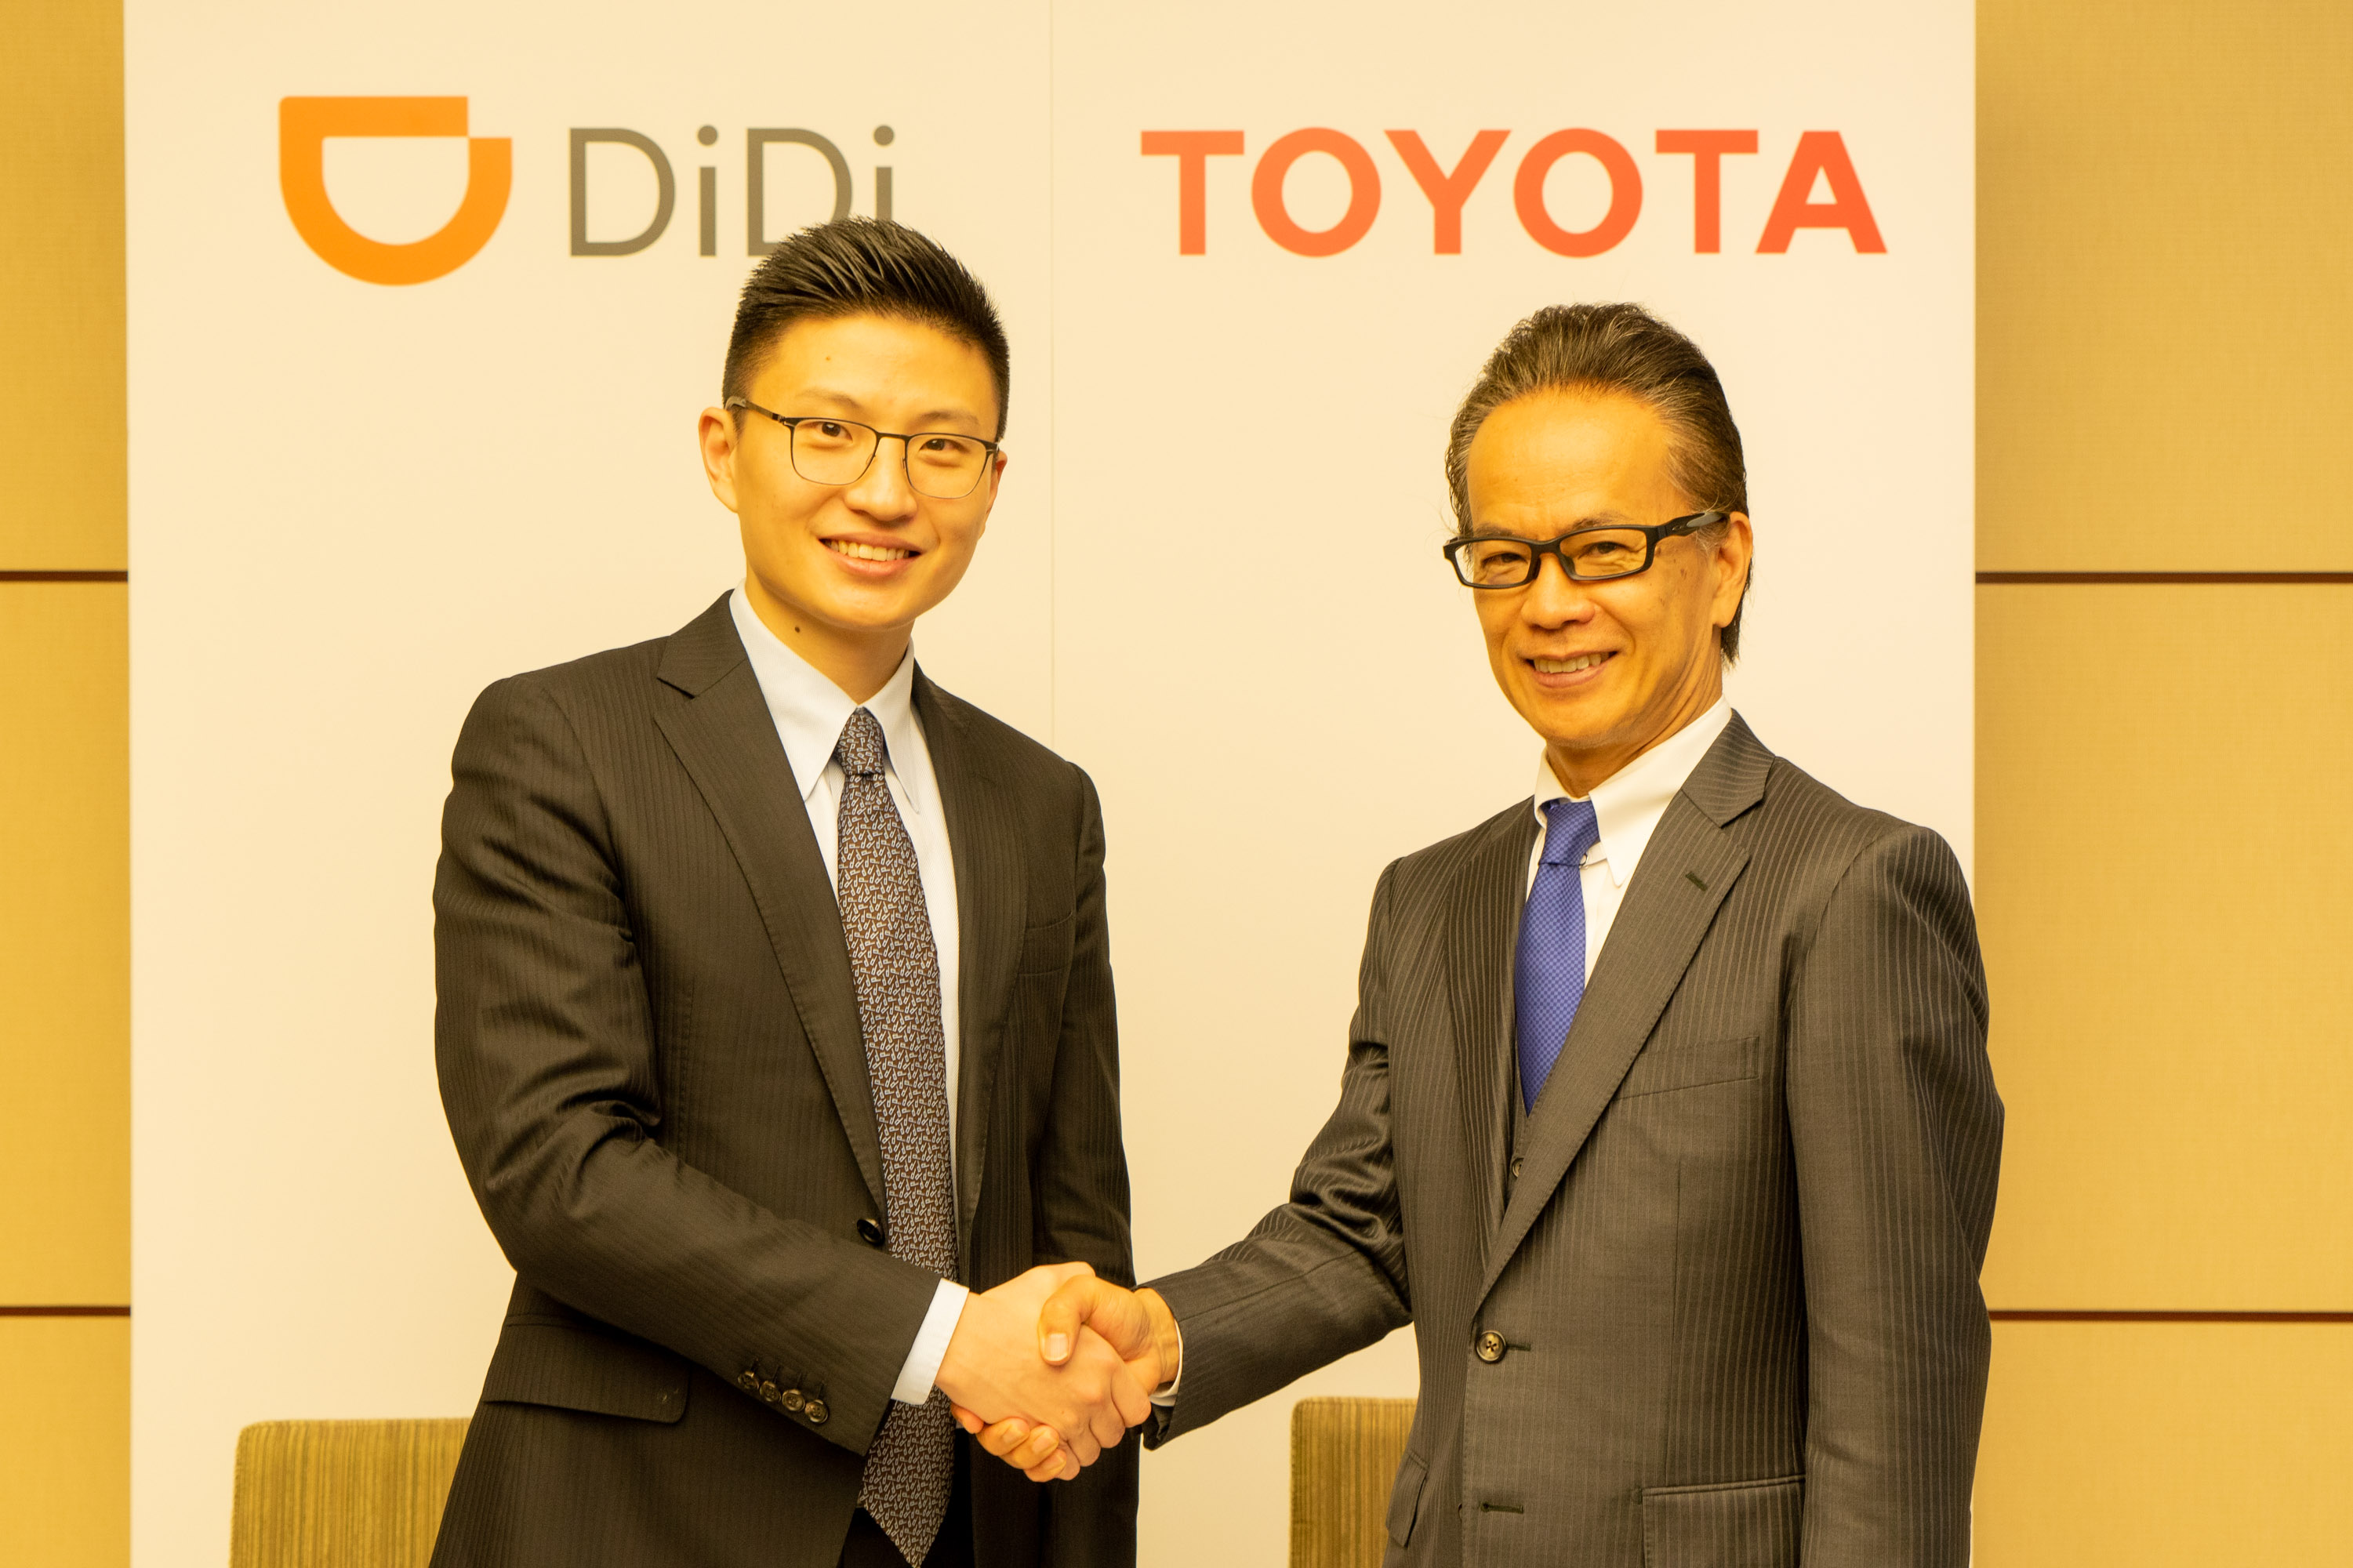 Toyota to invest USD 600 million in Didi Chuxing and their Japanese JV